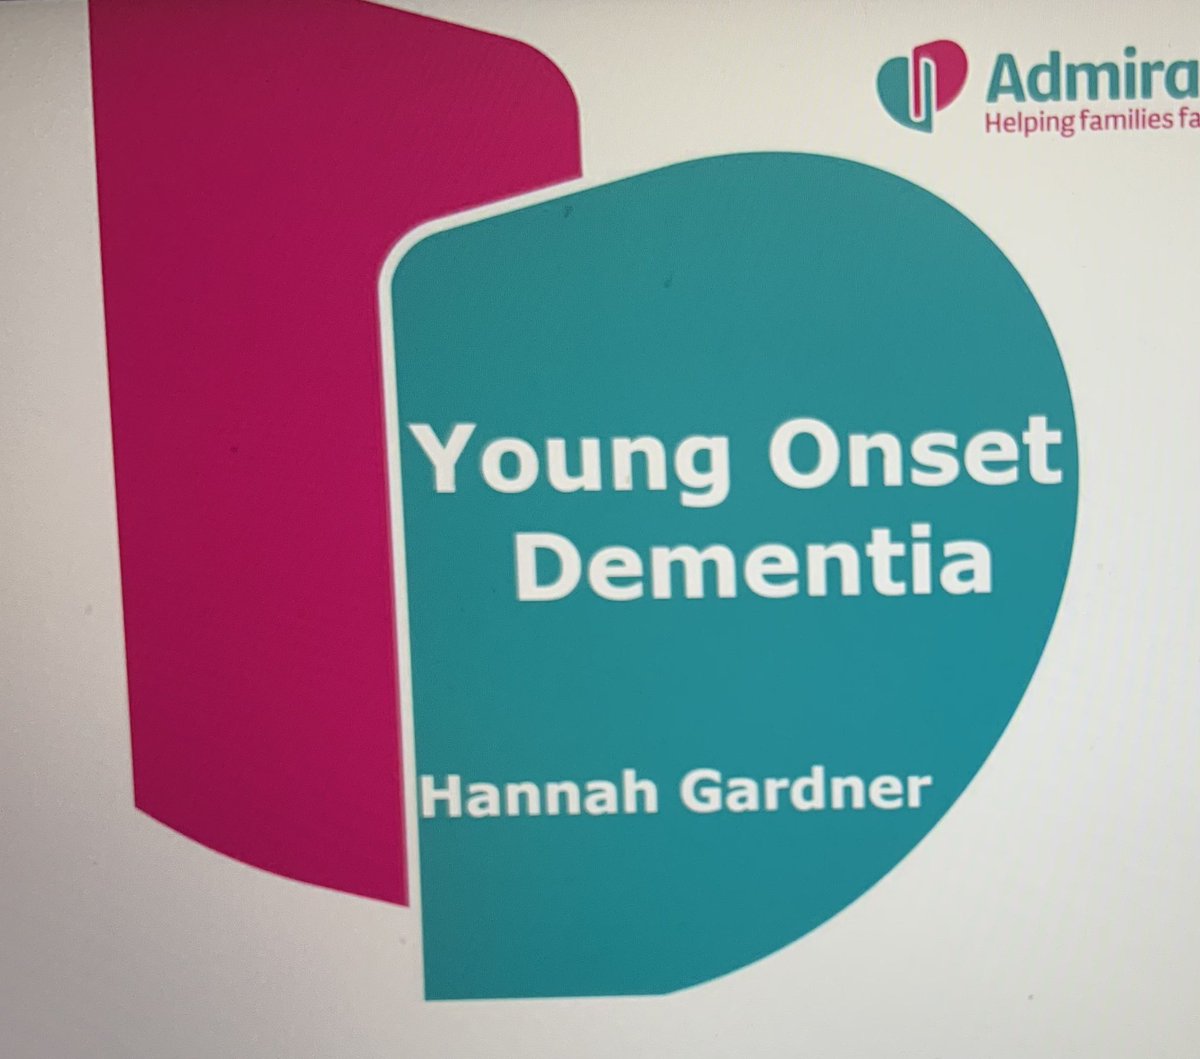 Pleasure talk on behalf @julesknightDUK to Bromley Memory Service Team about Young Onset Dementia #raredementia #impactonfamily #youngcarersupport #palliativecare #advancecareplanning @DementiaUK @YoungDemNetwork